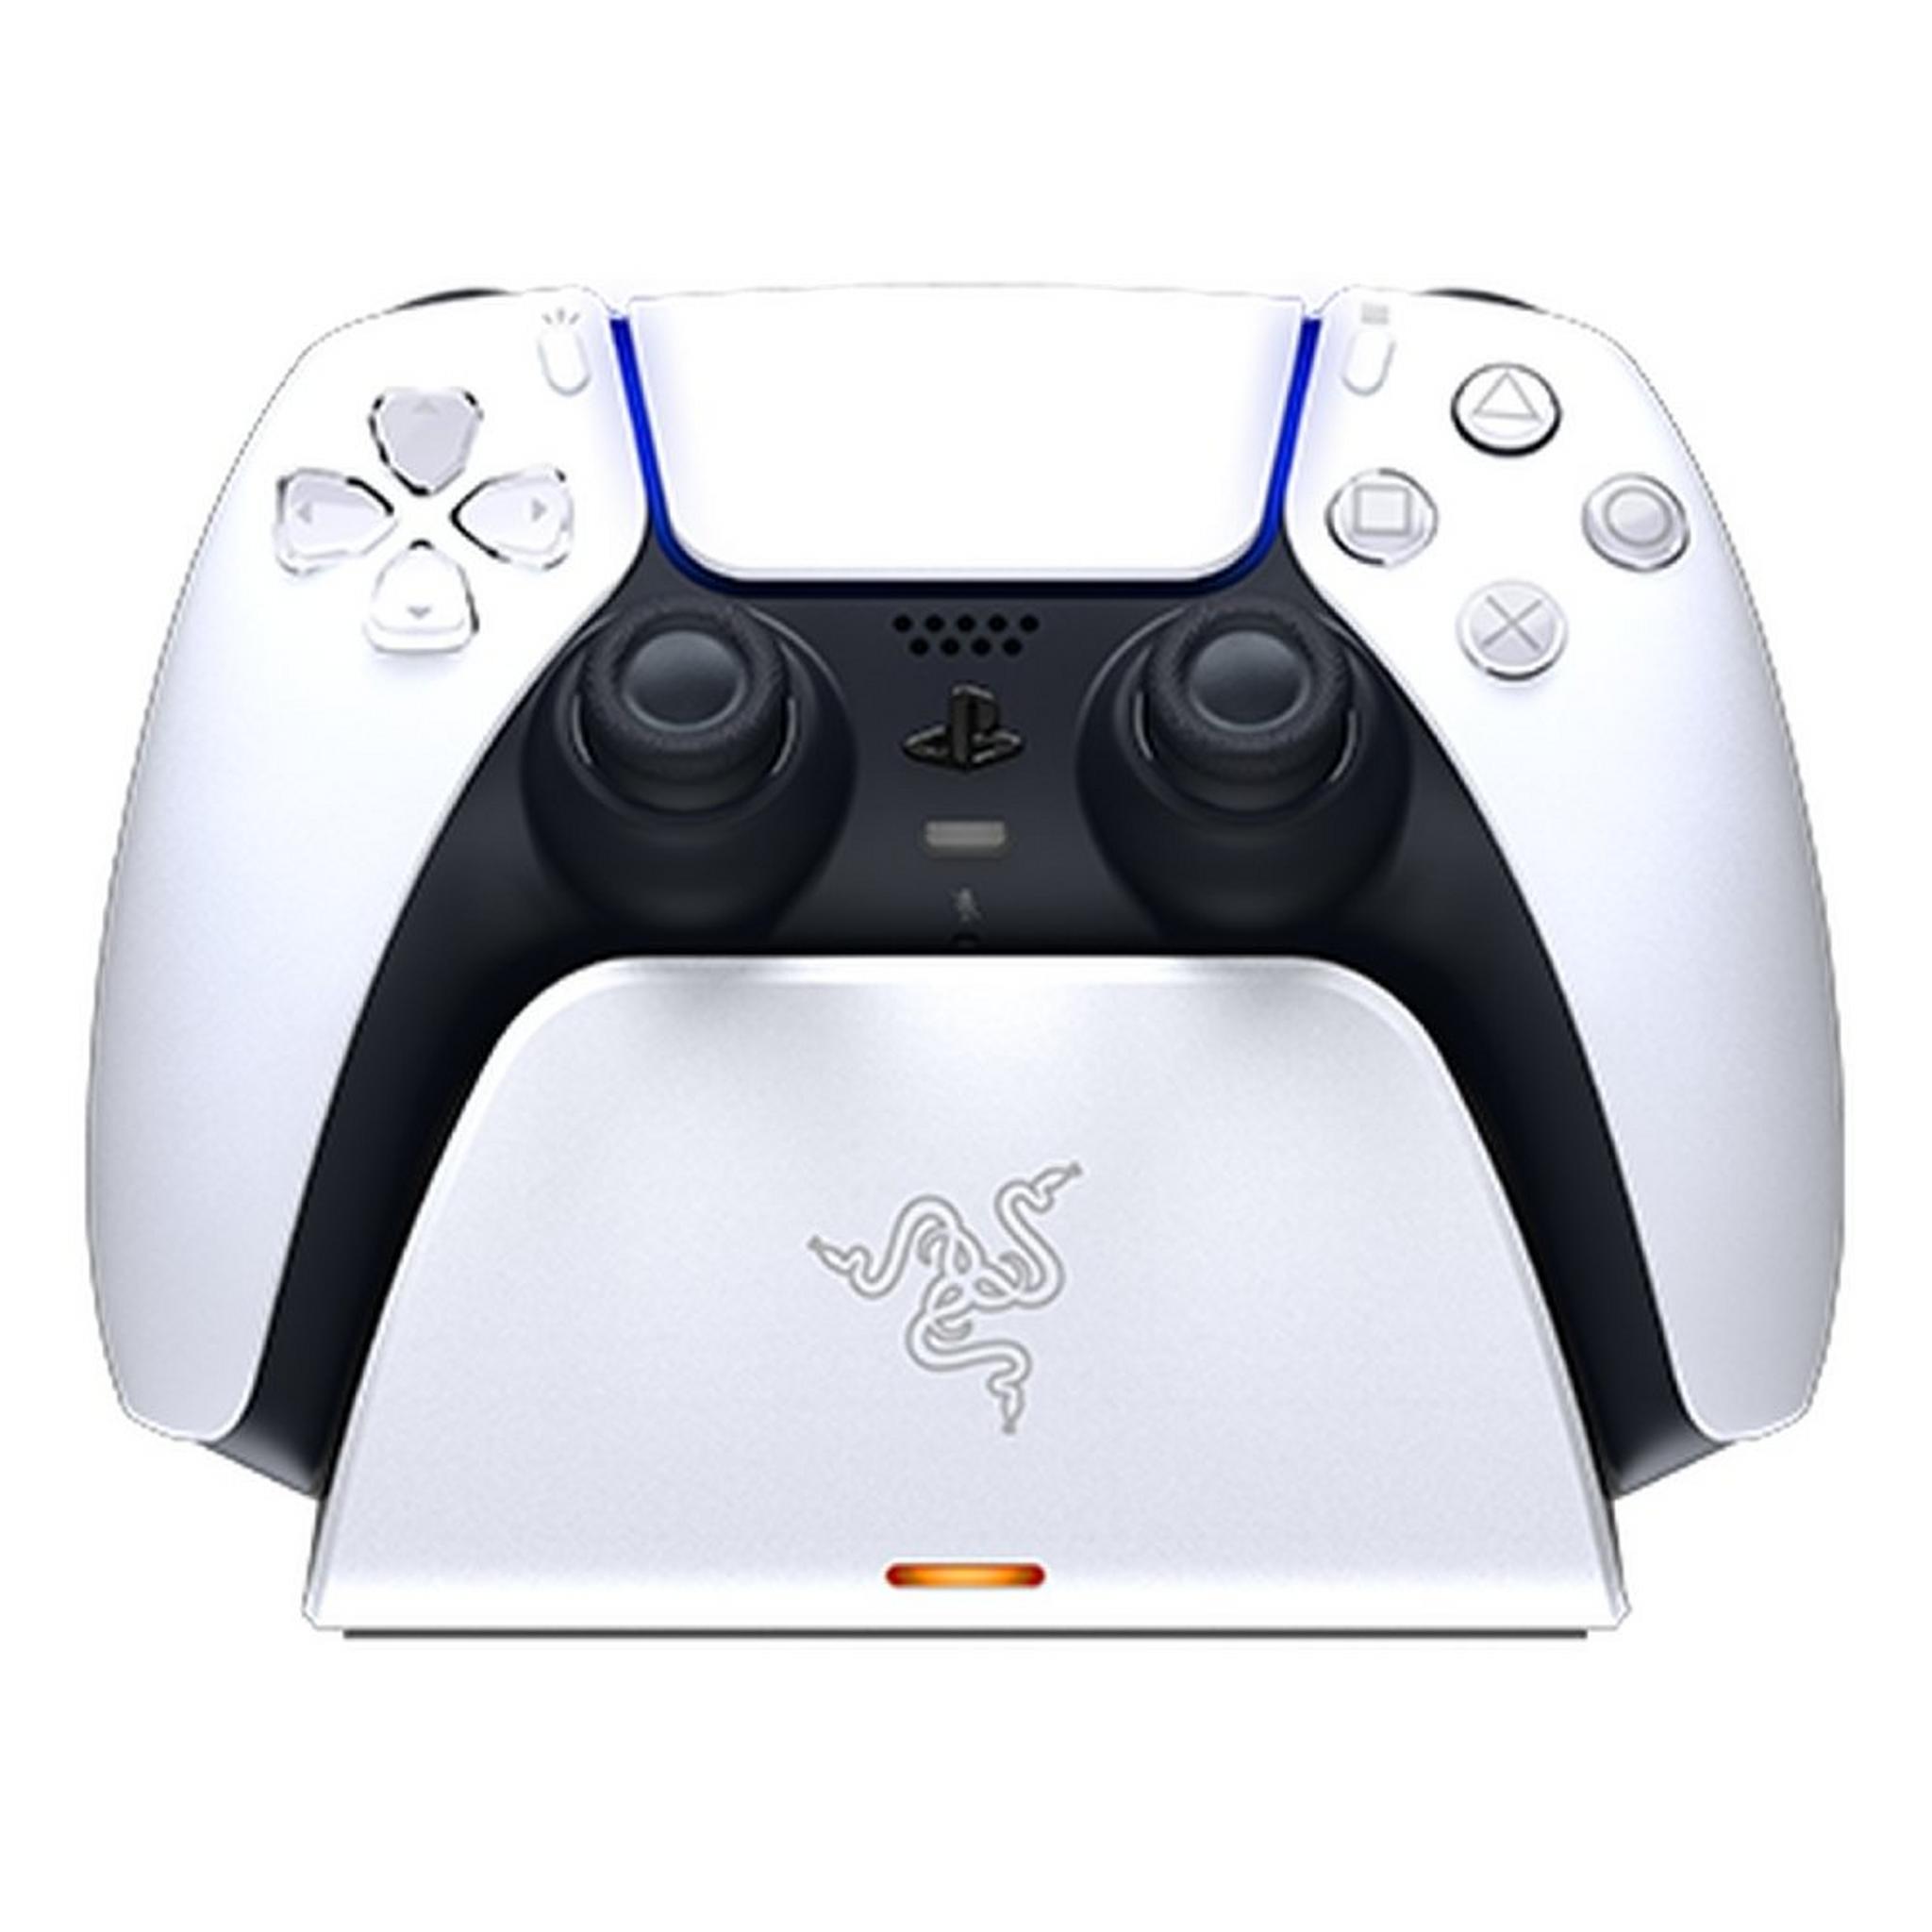 Razer Universal Quick Charging Stand for PS5 - White (Controller sold separately)